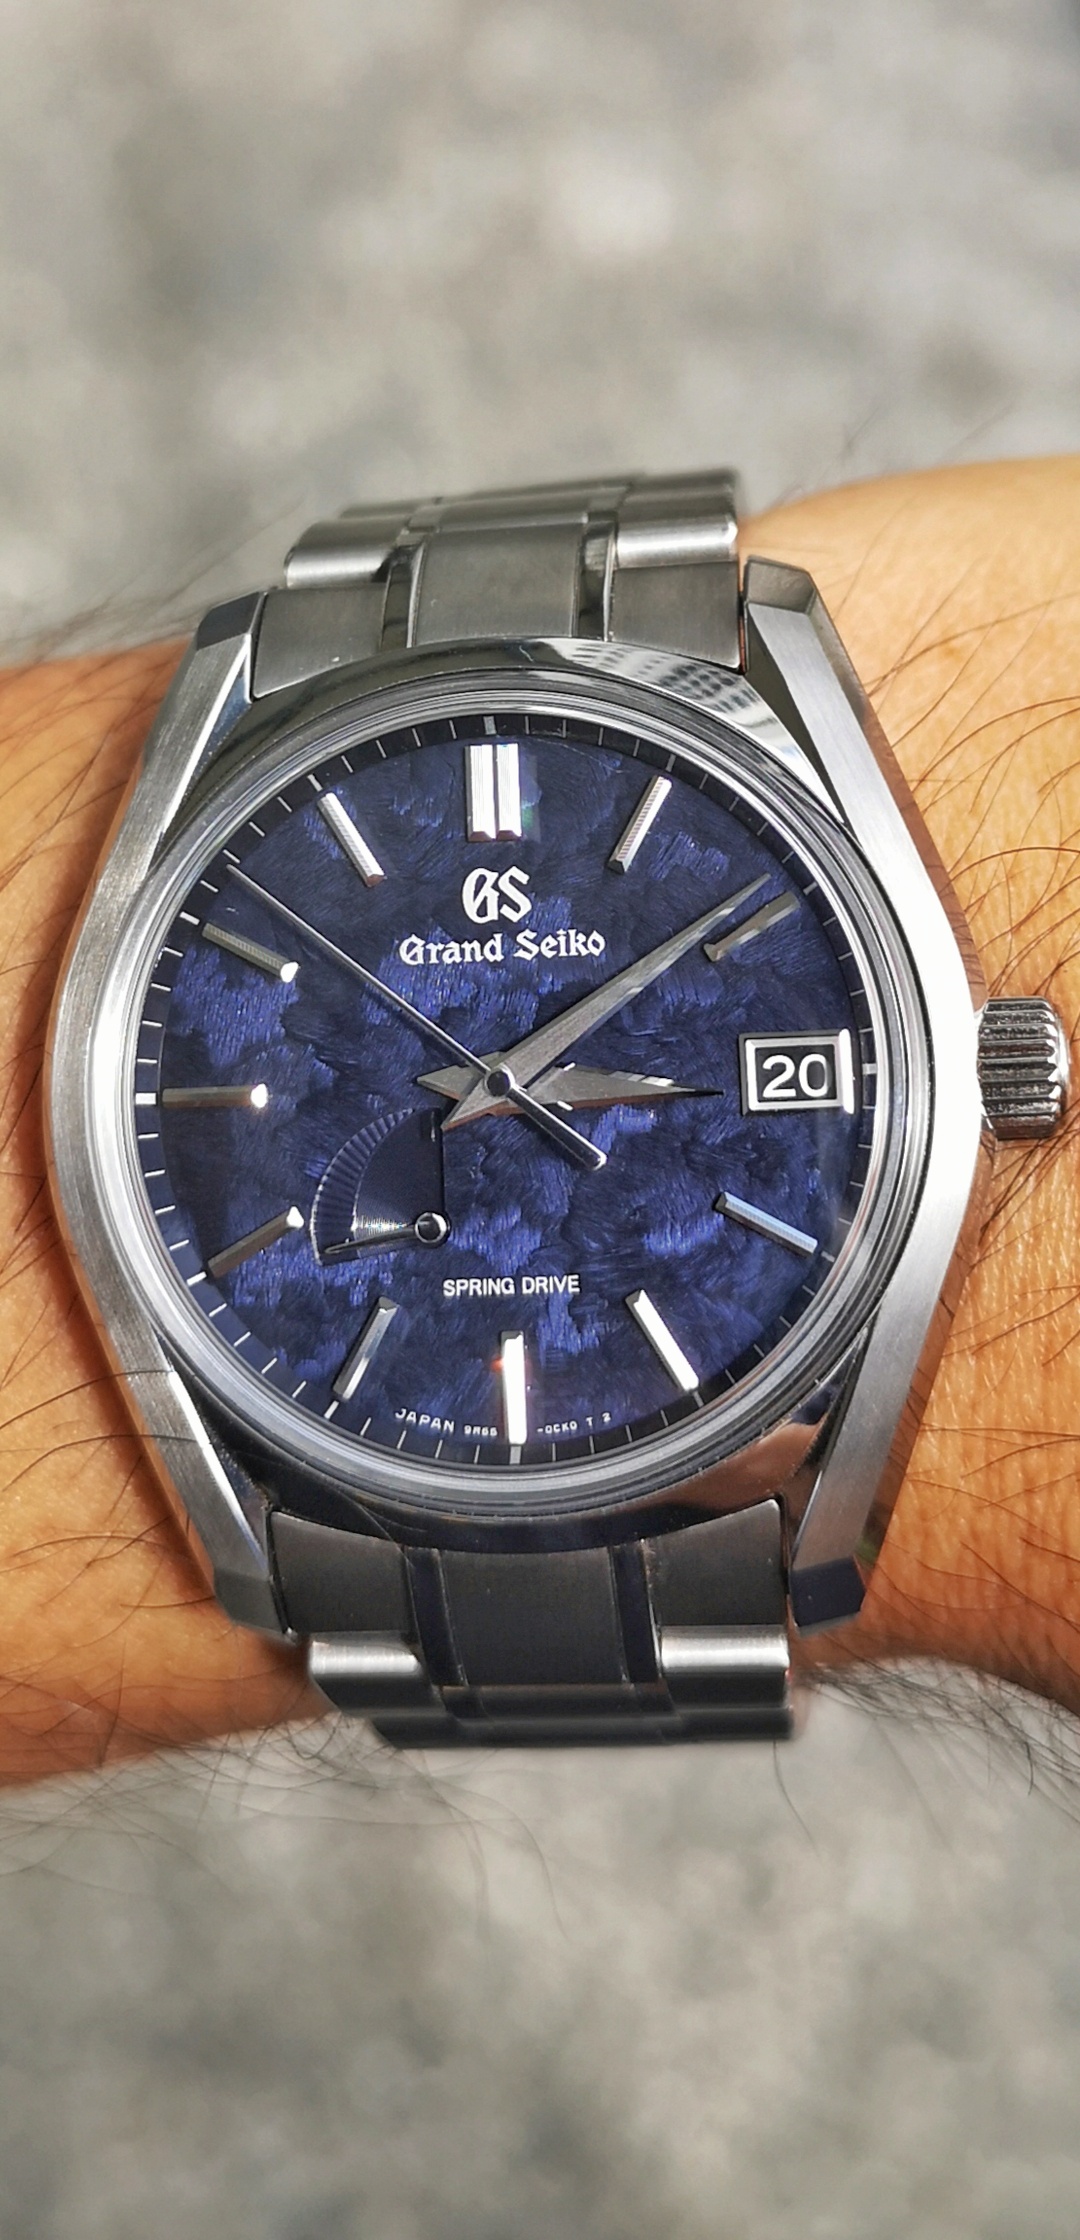 Grand Seiko Snowflake - Does GS only get More Collectible from Here? |  Omega Forums